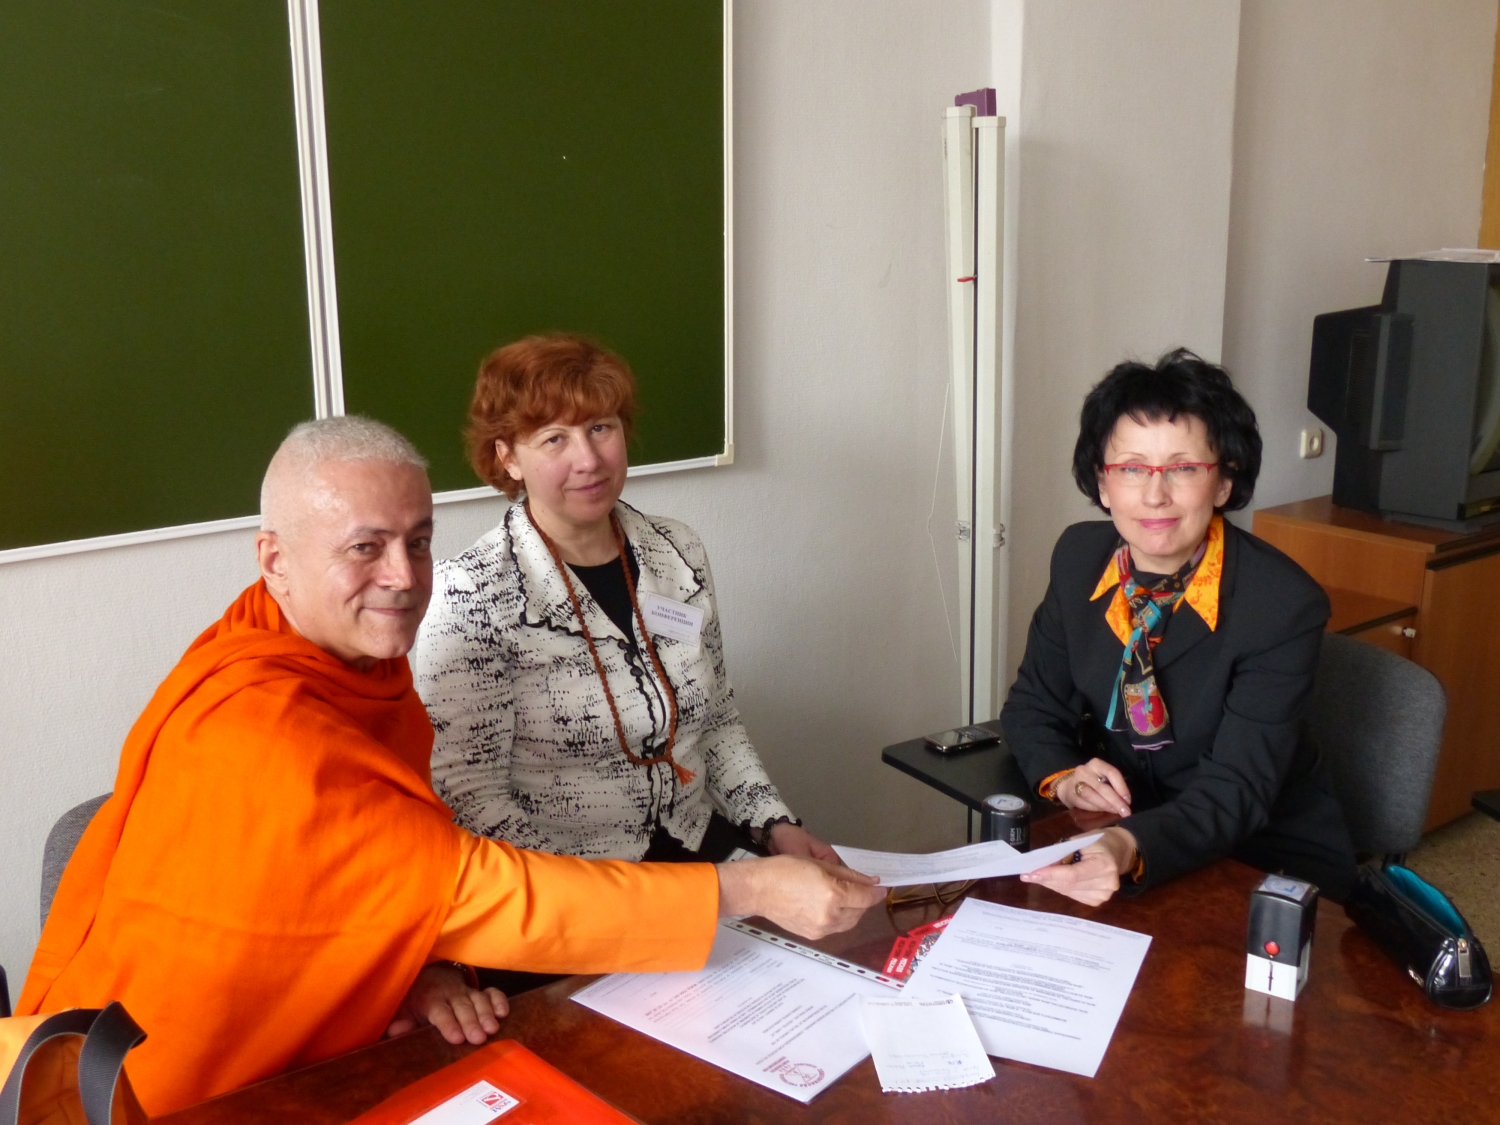 Meeting with the Board of Direction of the Classical Yoga Federation of Russia - Moscow, Russia - 2013, April (...)